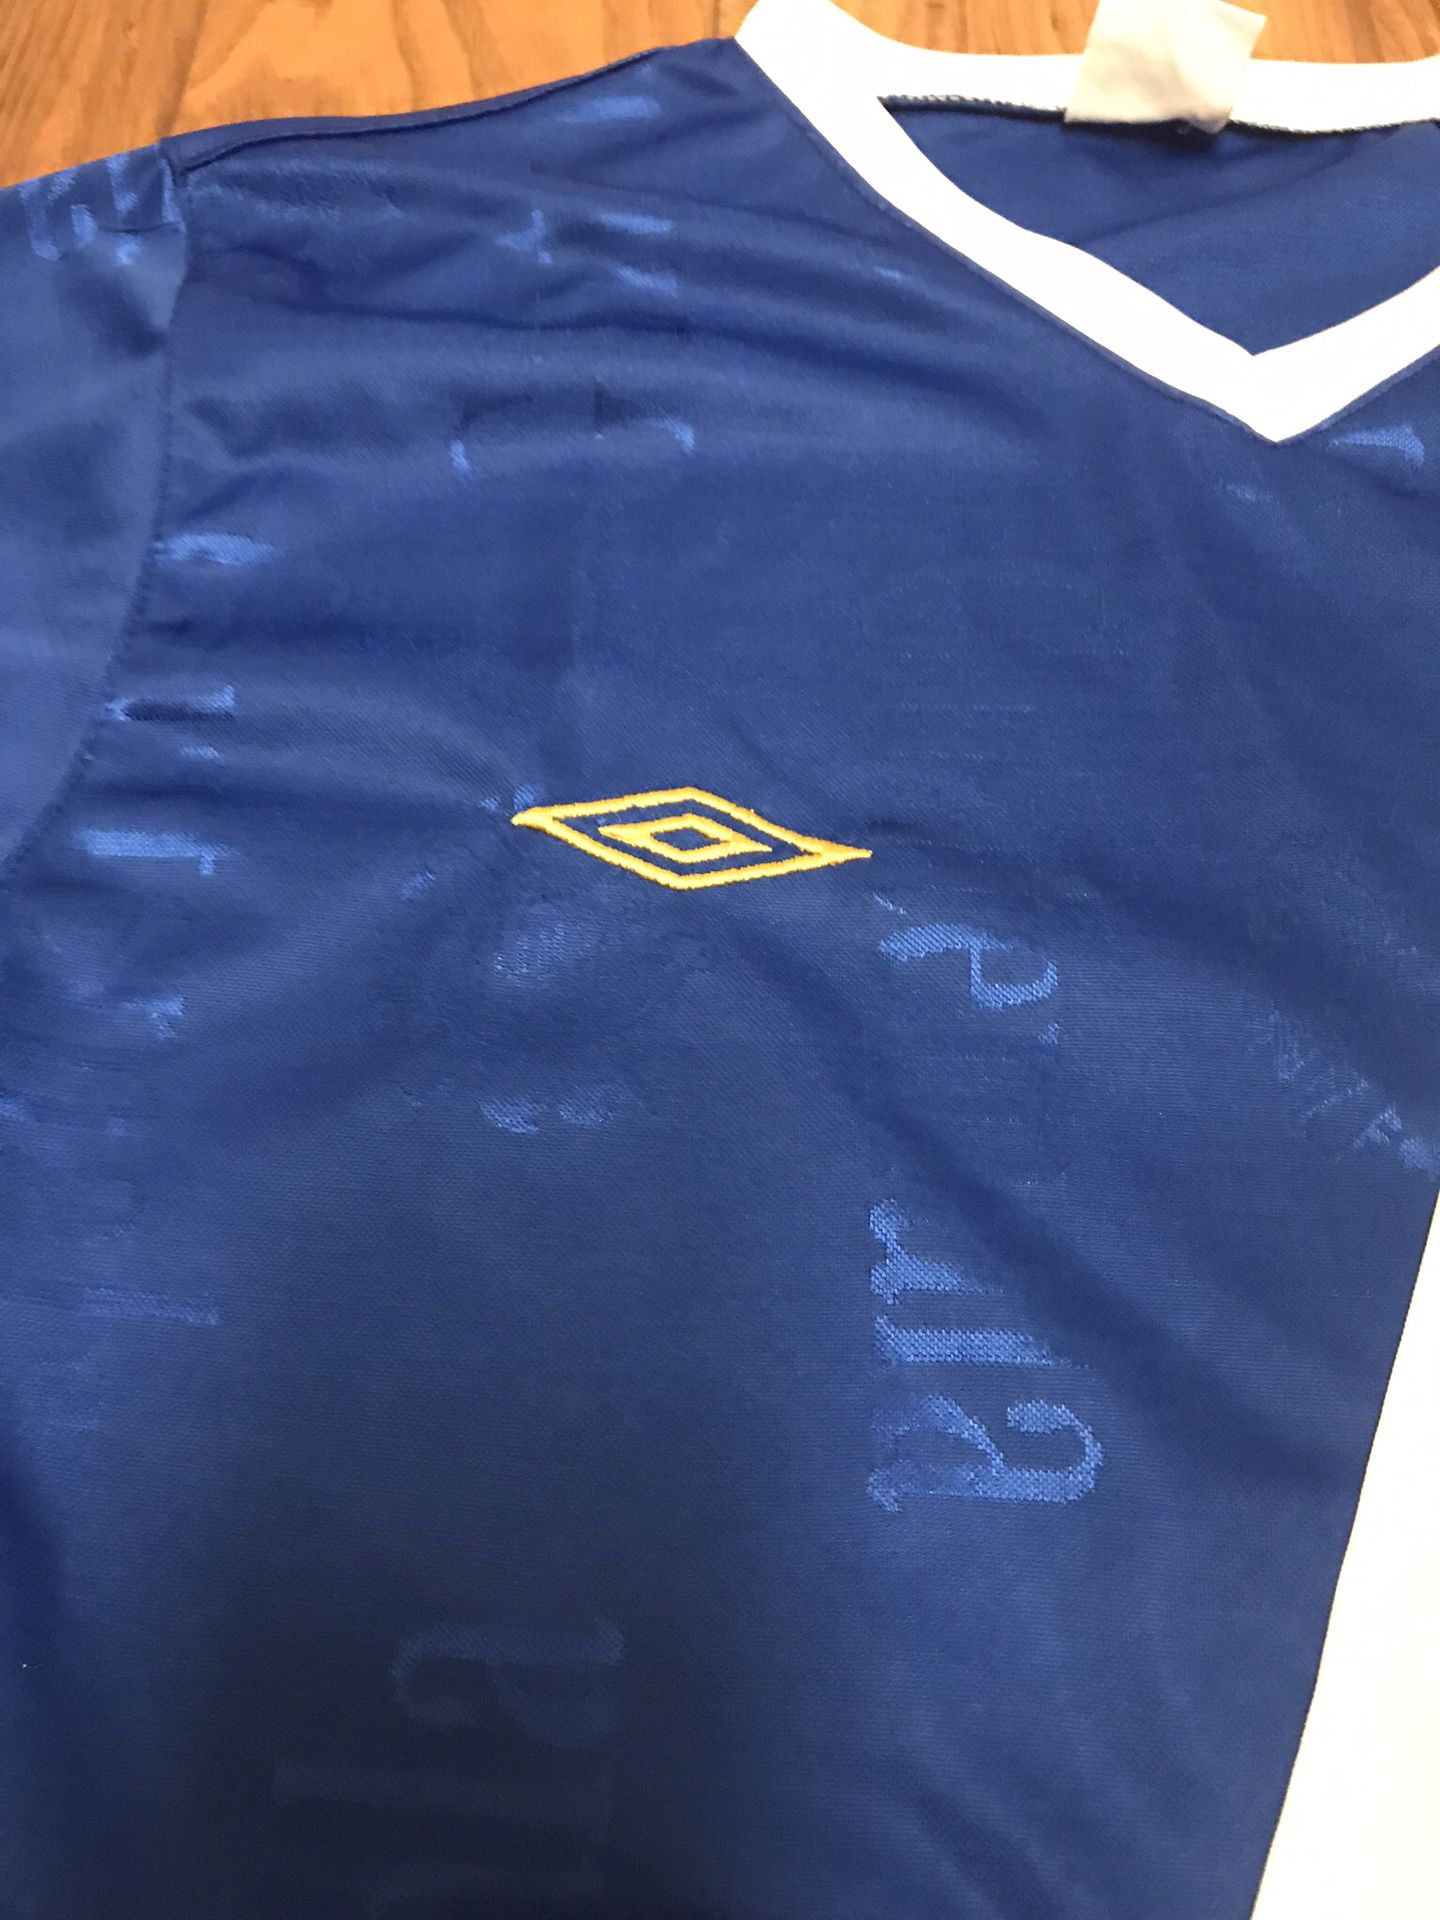 MENS UMBRO GUATEMALA SOCCER JERSEY SZ M for Sale in San Diego, CA 